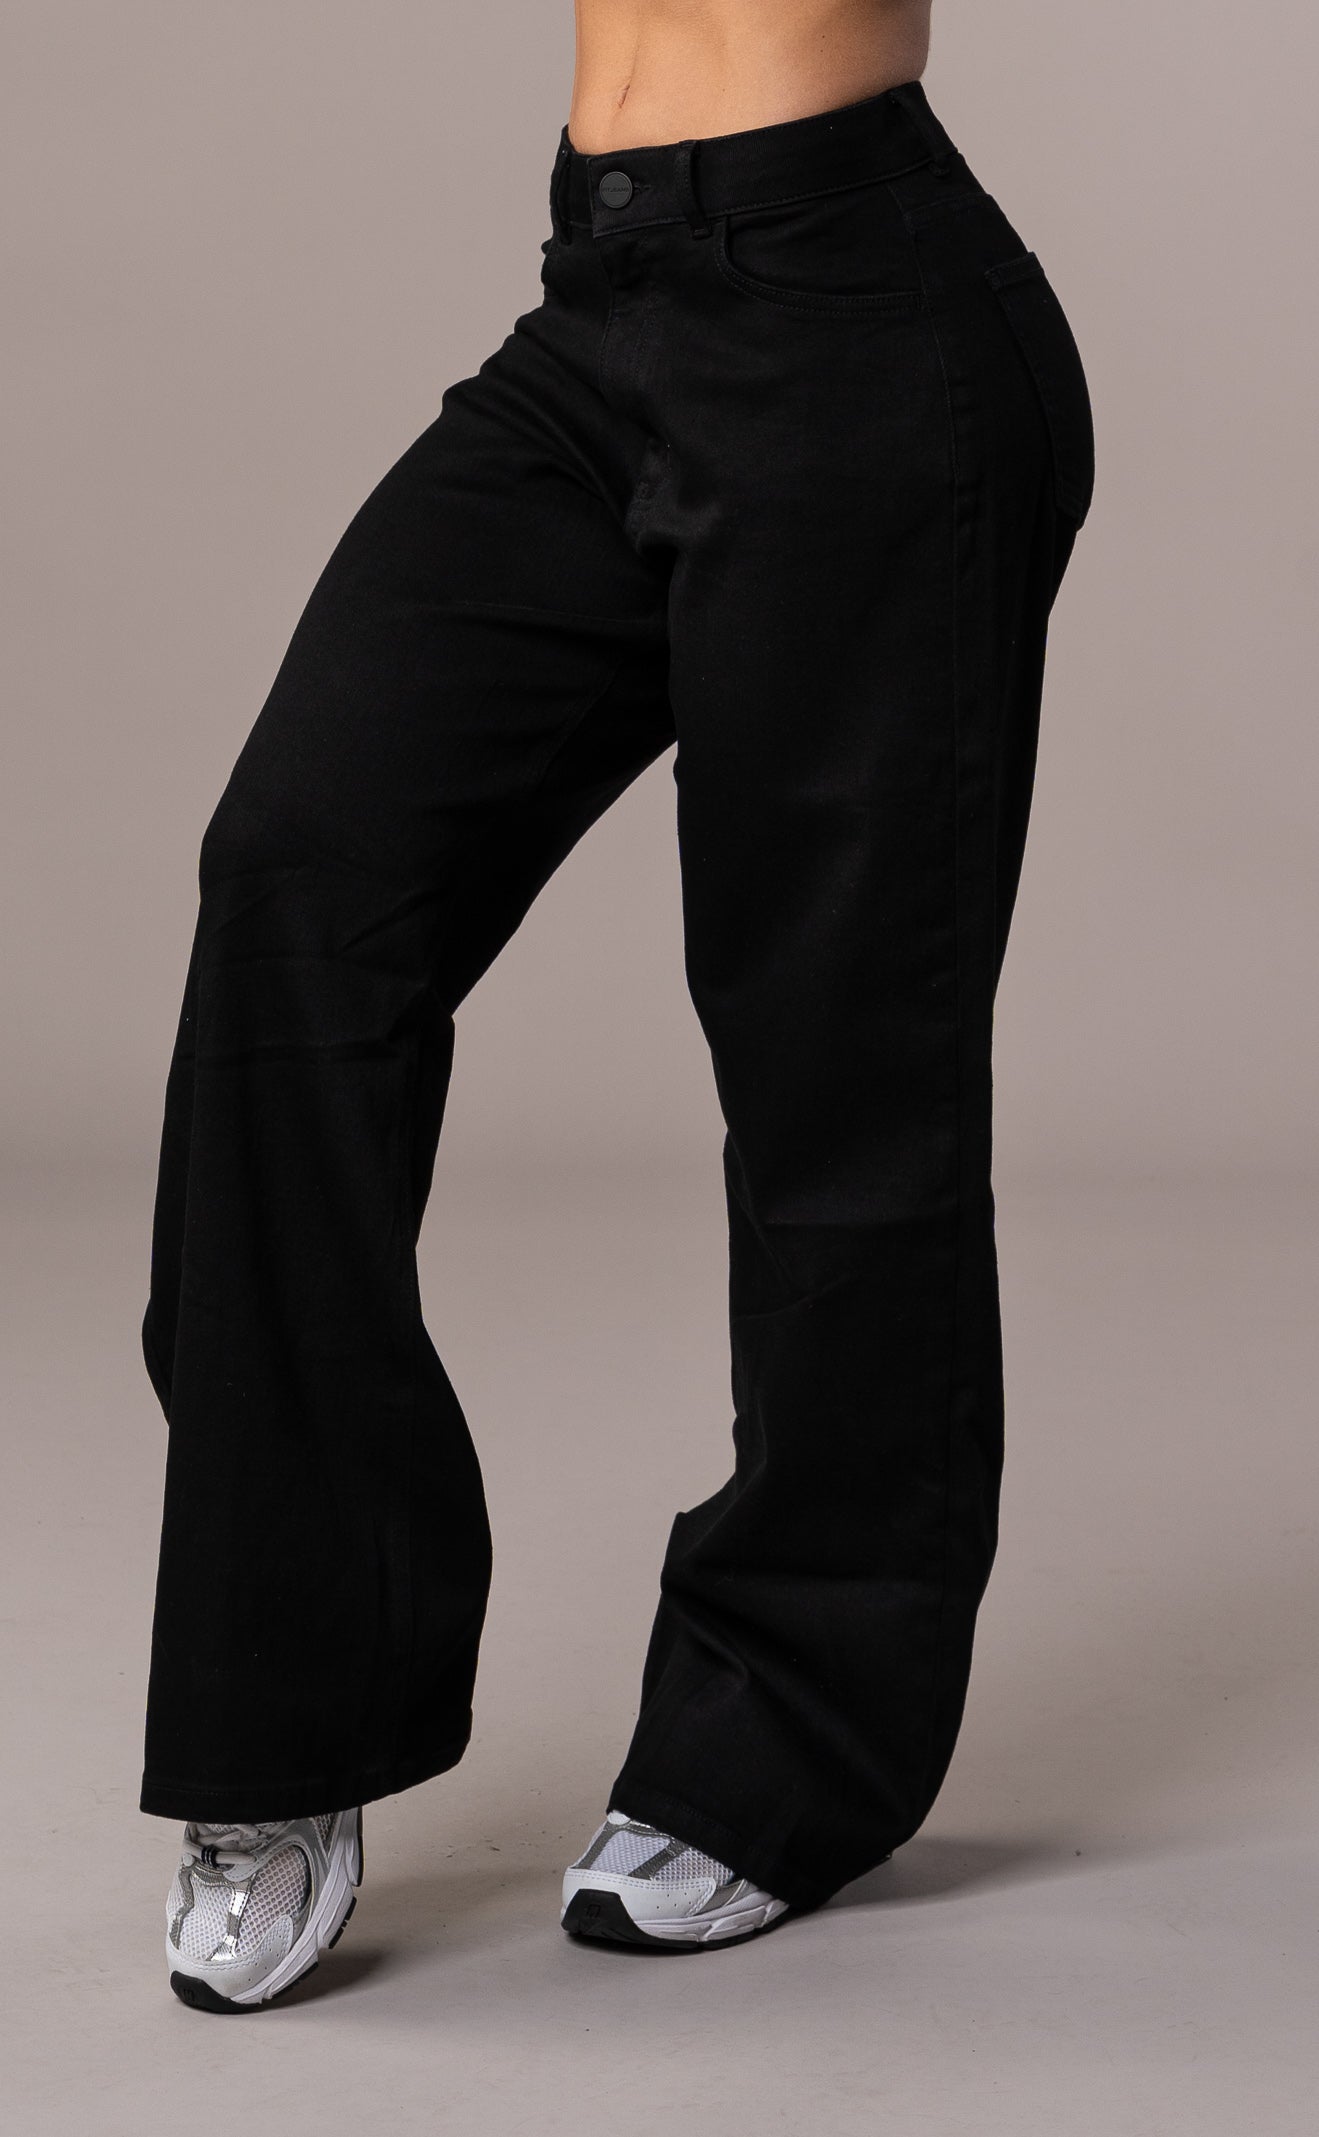 Womens Baggy Fitjeans - Black Baggy FITJEANS   